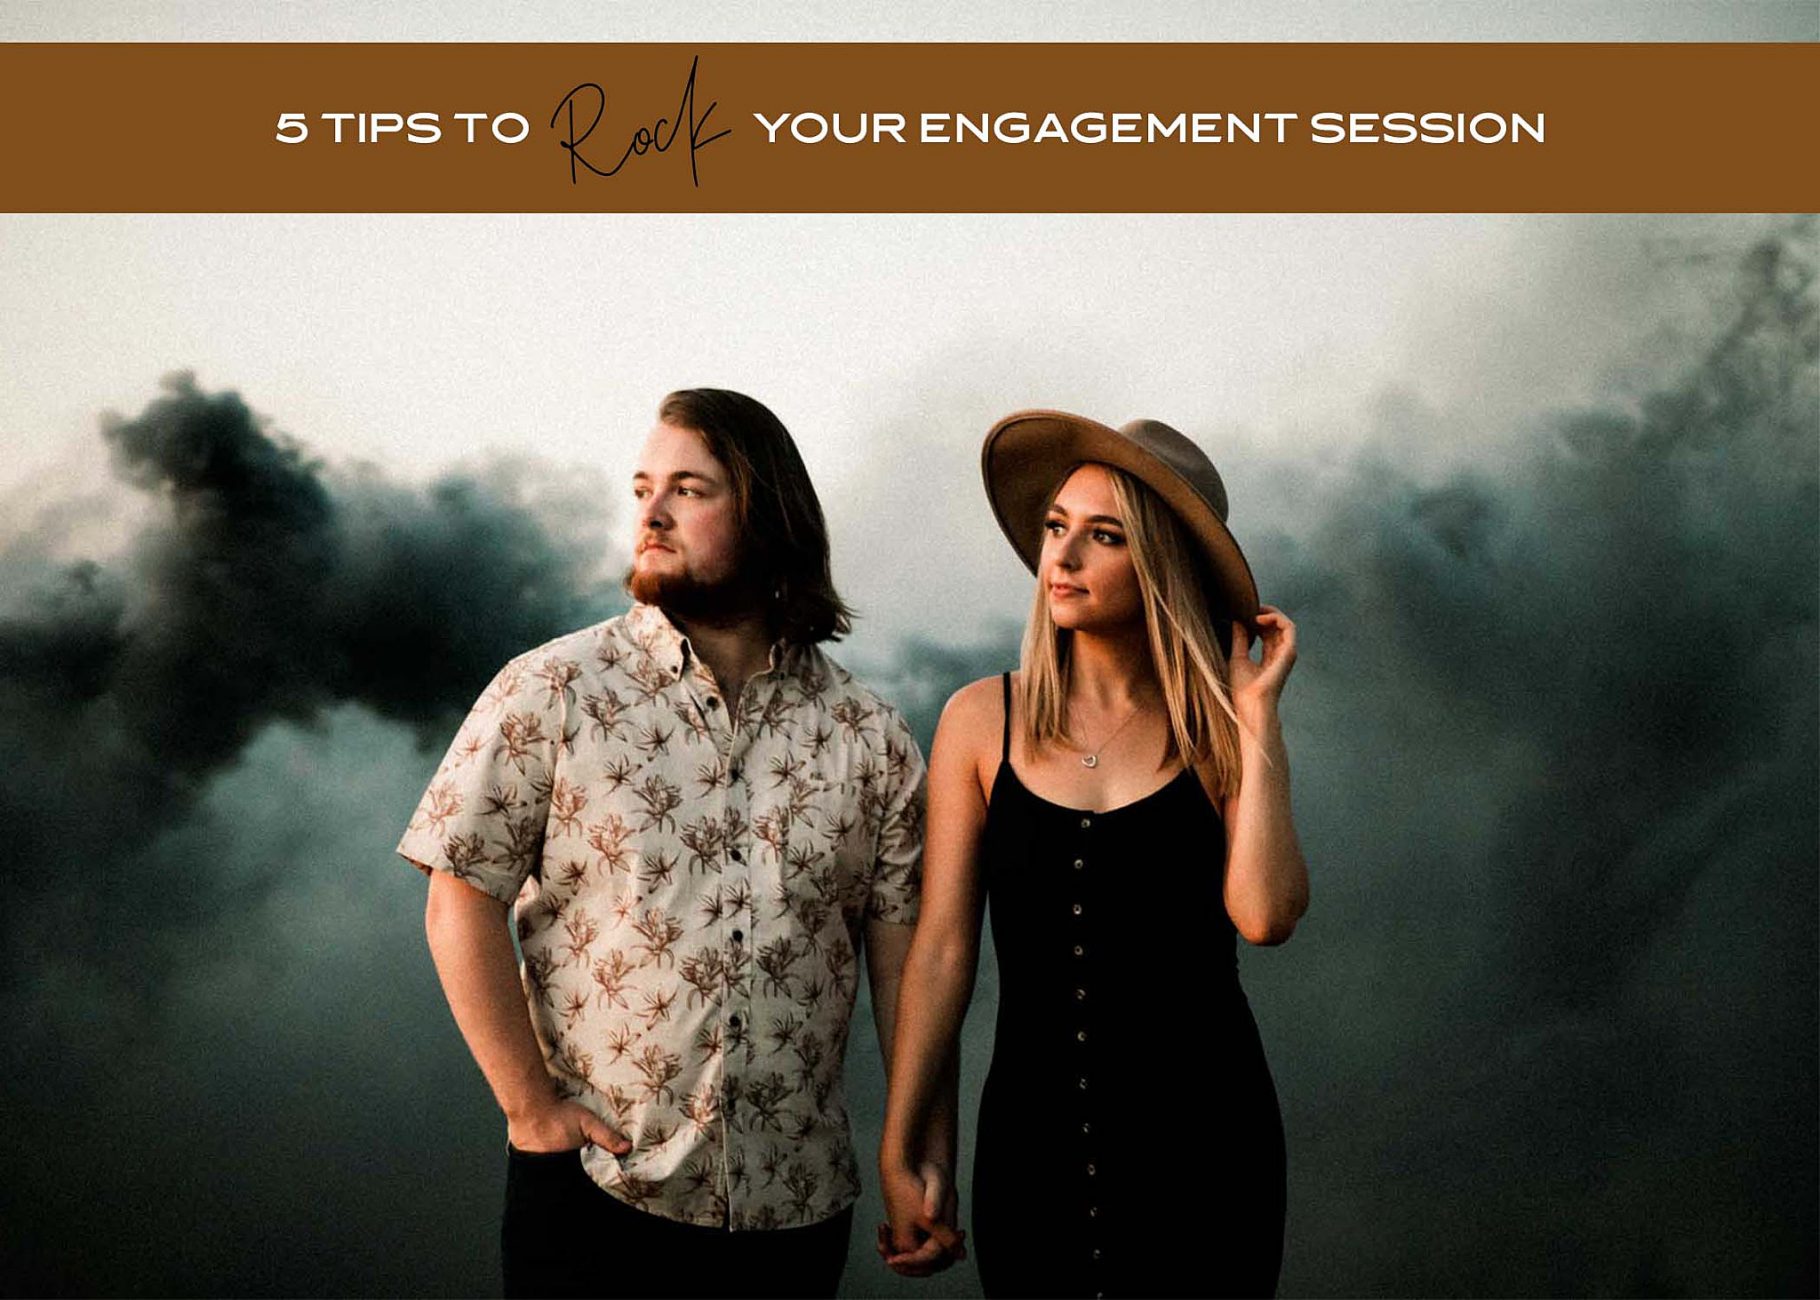 Blog post information article with the 5 best engagement session tips to rock your 2021 engagement session